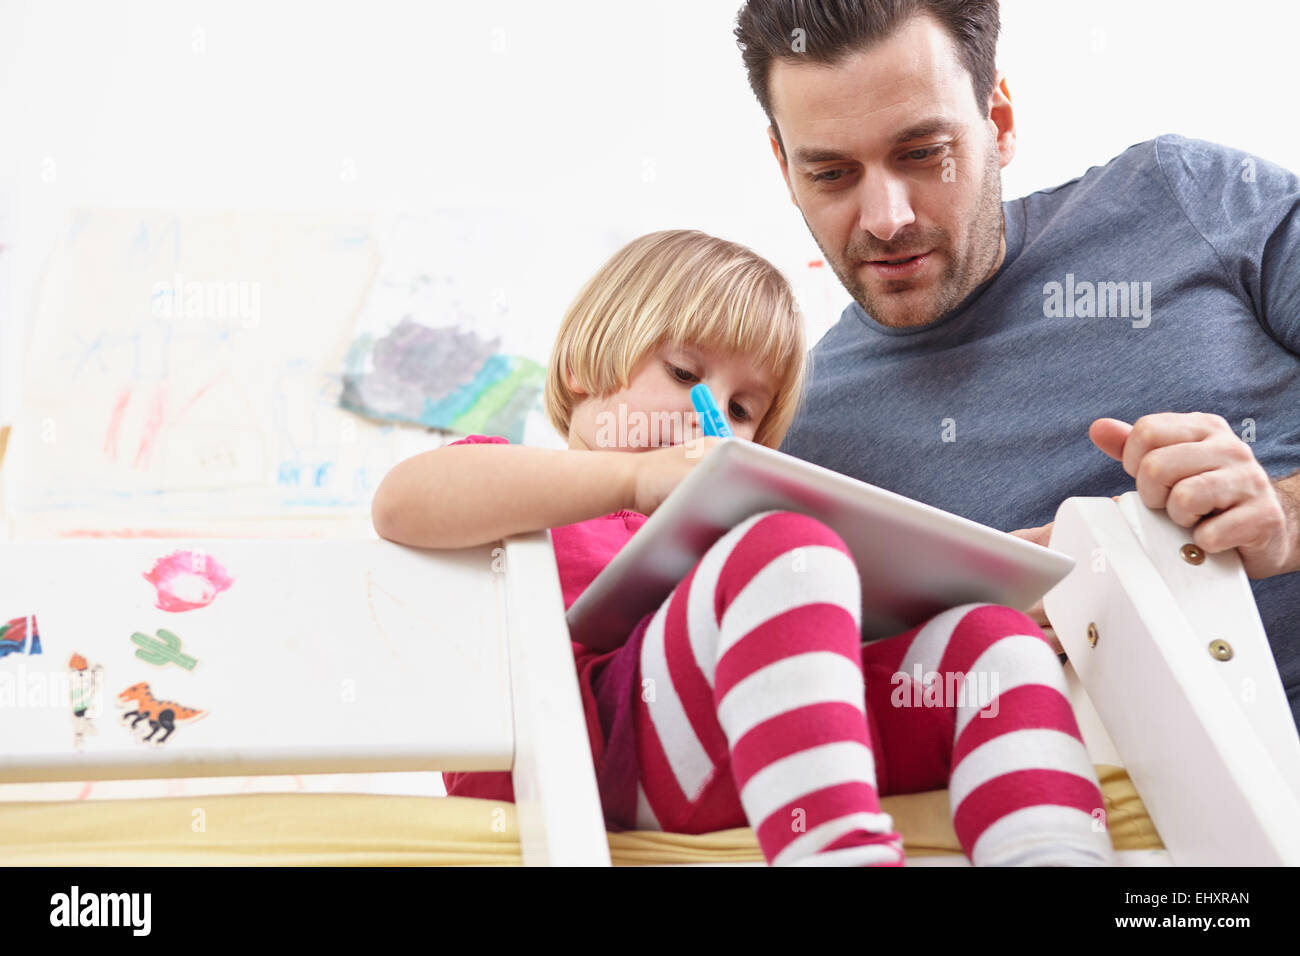 Little girl sitting on bunk bed, drawing on touch pad, father watching Stock Photo